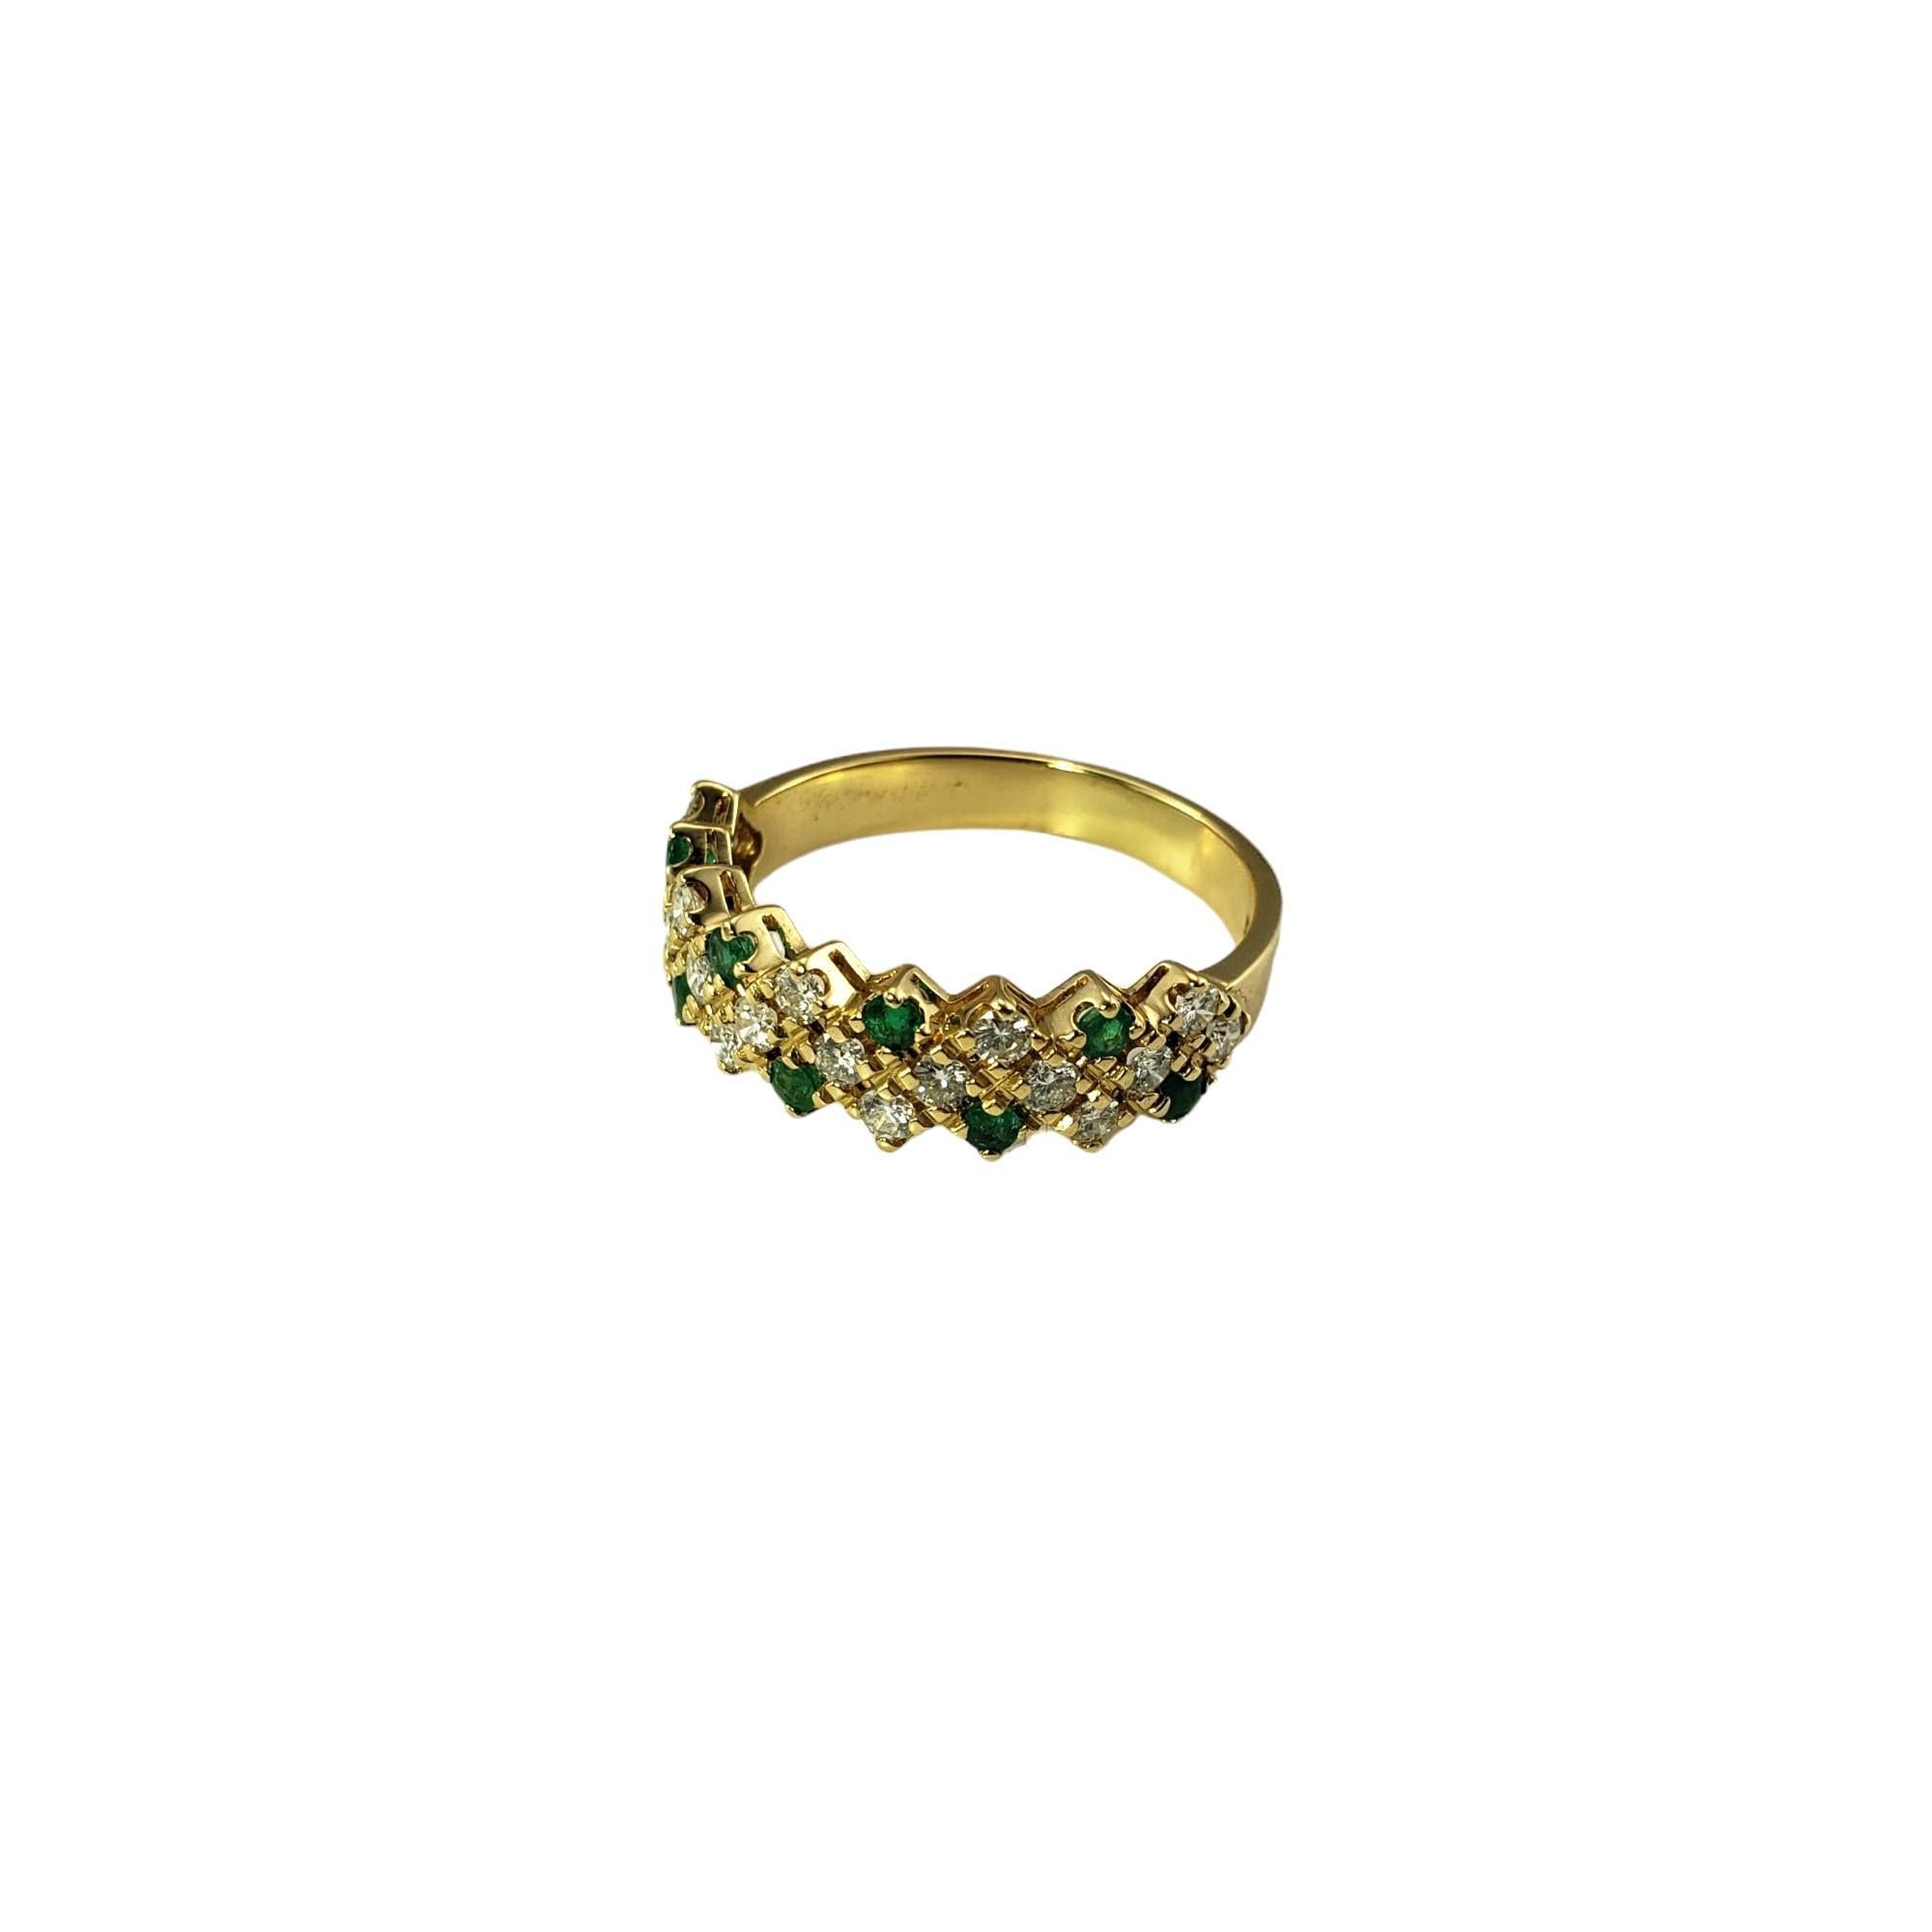 Round Cut 18K Yellow Gold Emerald and Diamond Ring Size 8.75 #16641 For Sale